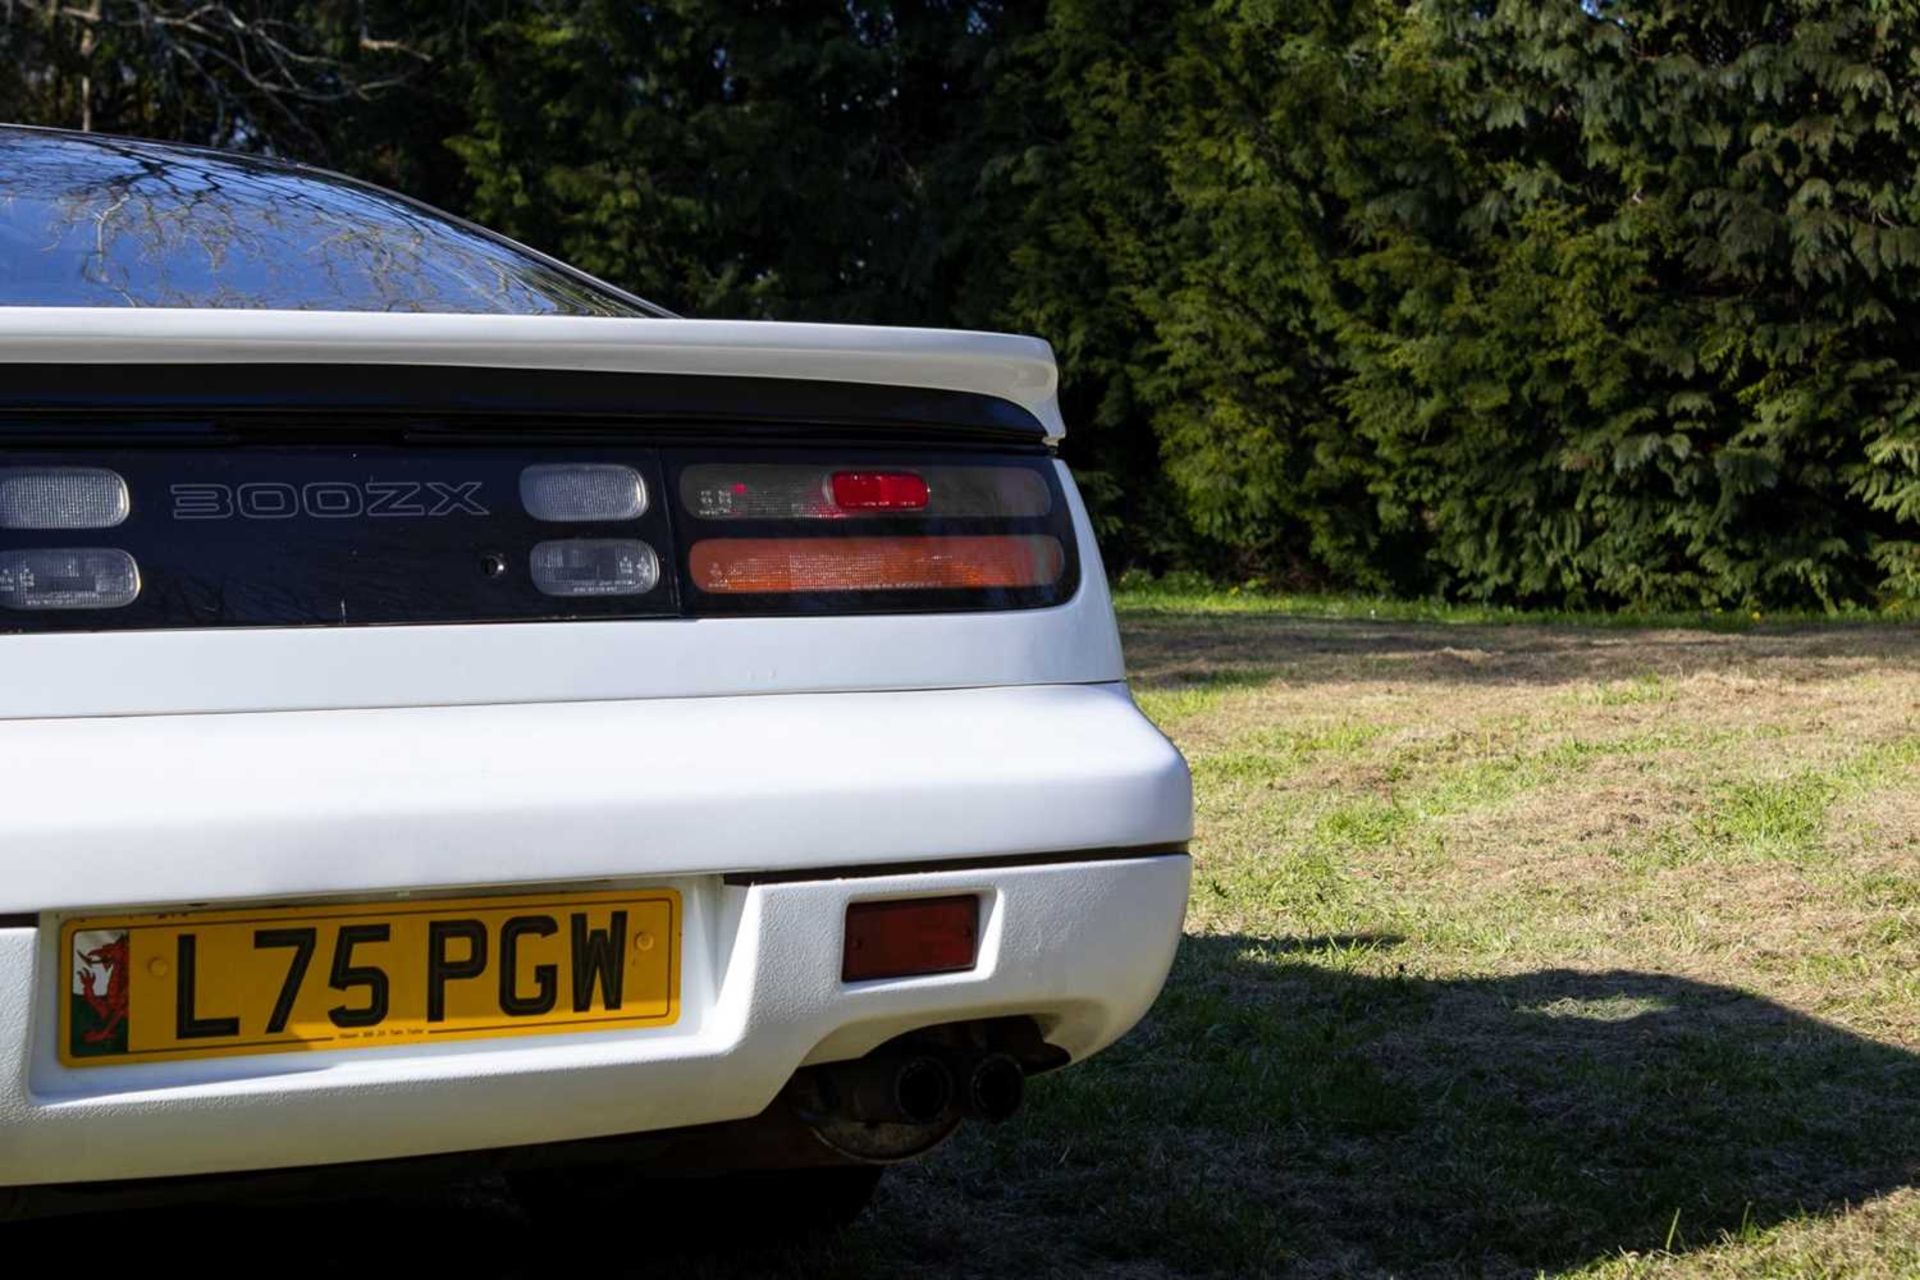 1990 Nissan 300ZX Turbo 2+2 Targa One of the last examples registered in the UK - Image 22 of 89